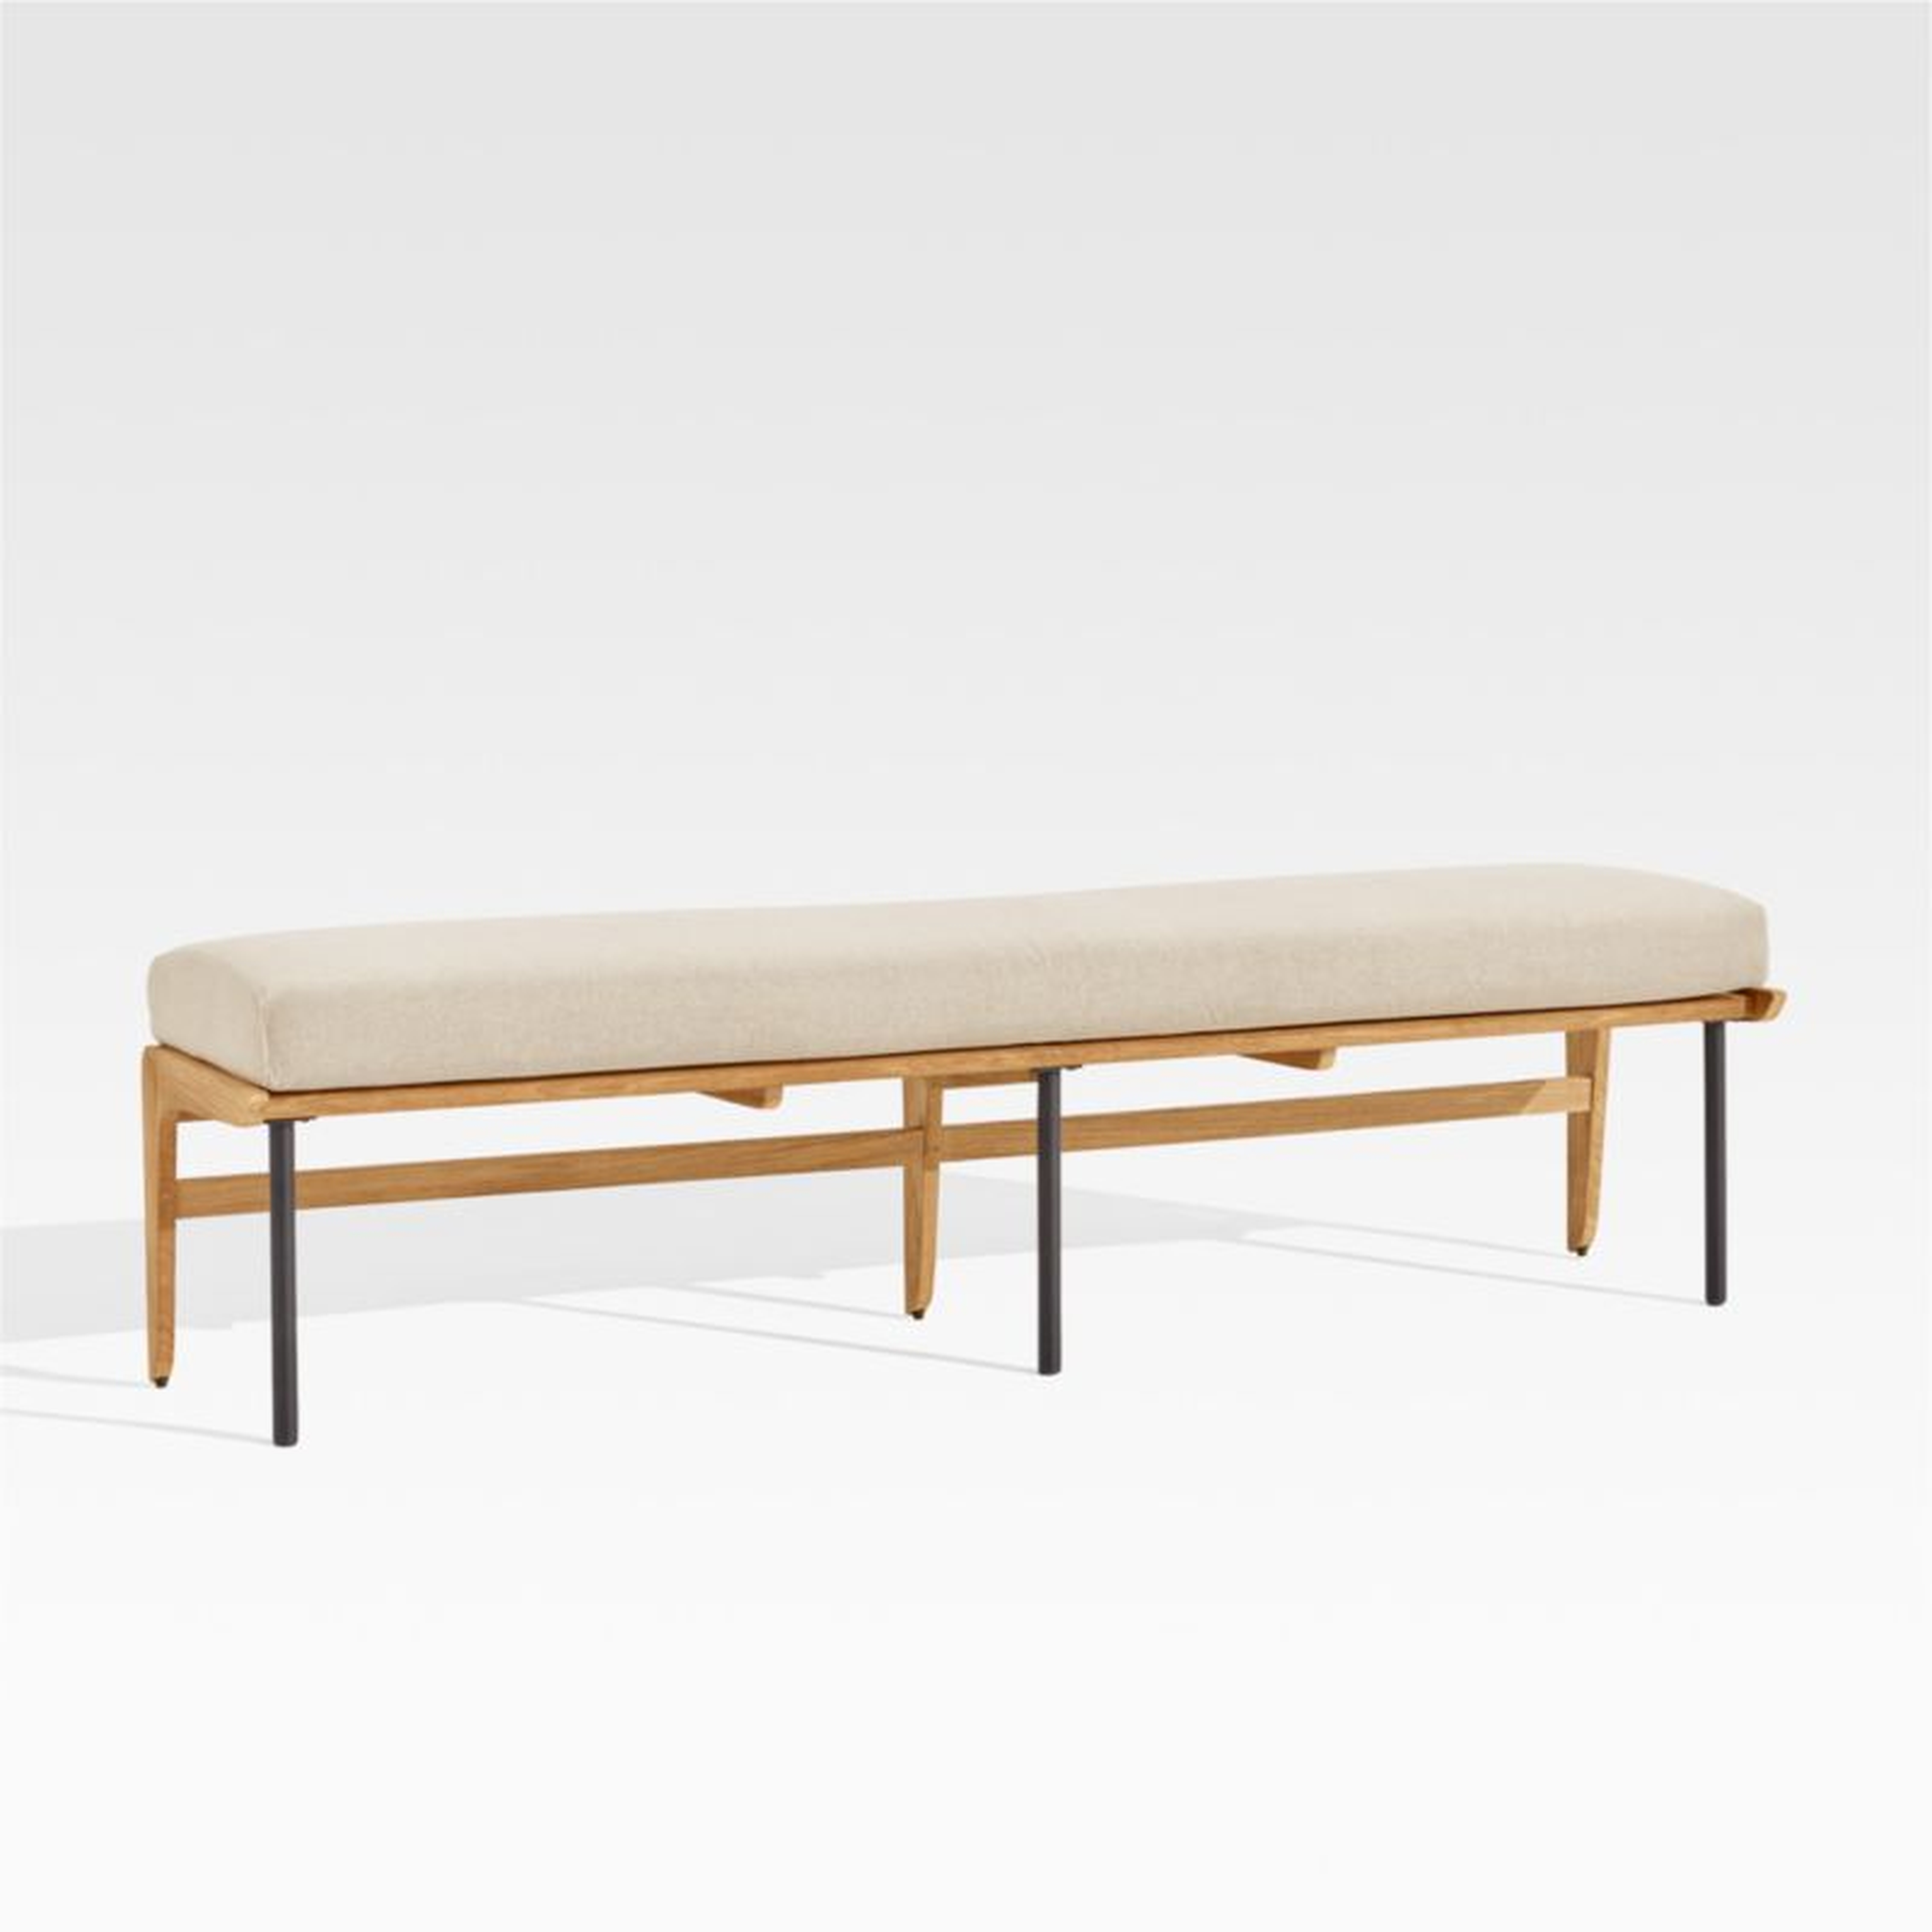 Kinney Teak Wood Outdoor Dining Bench with Cushion - Crate and Barrel